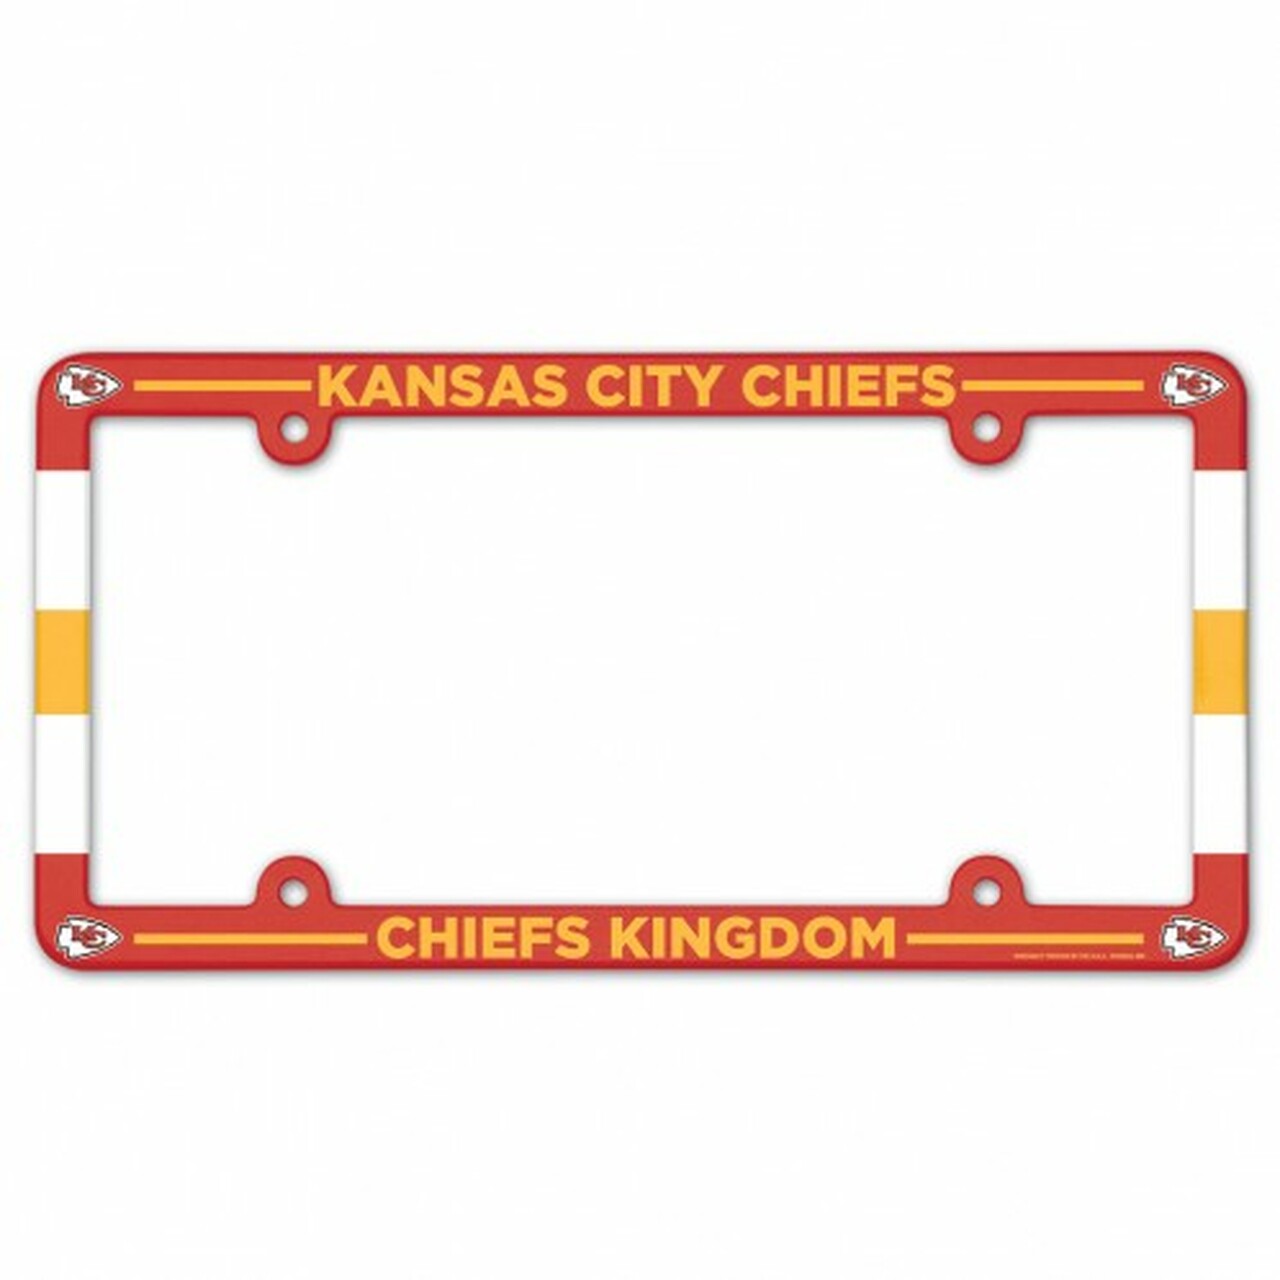 Kansas City Chiefs Full Color Plastic License Plate Frame by Wincraft